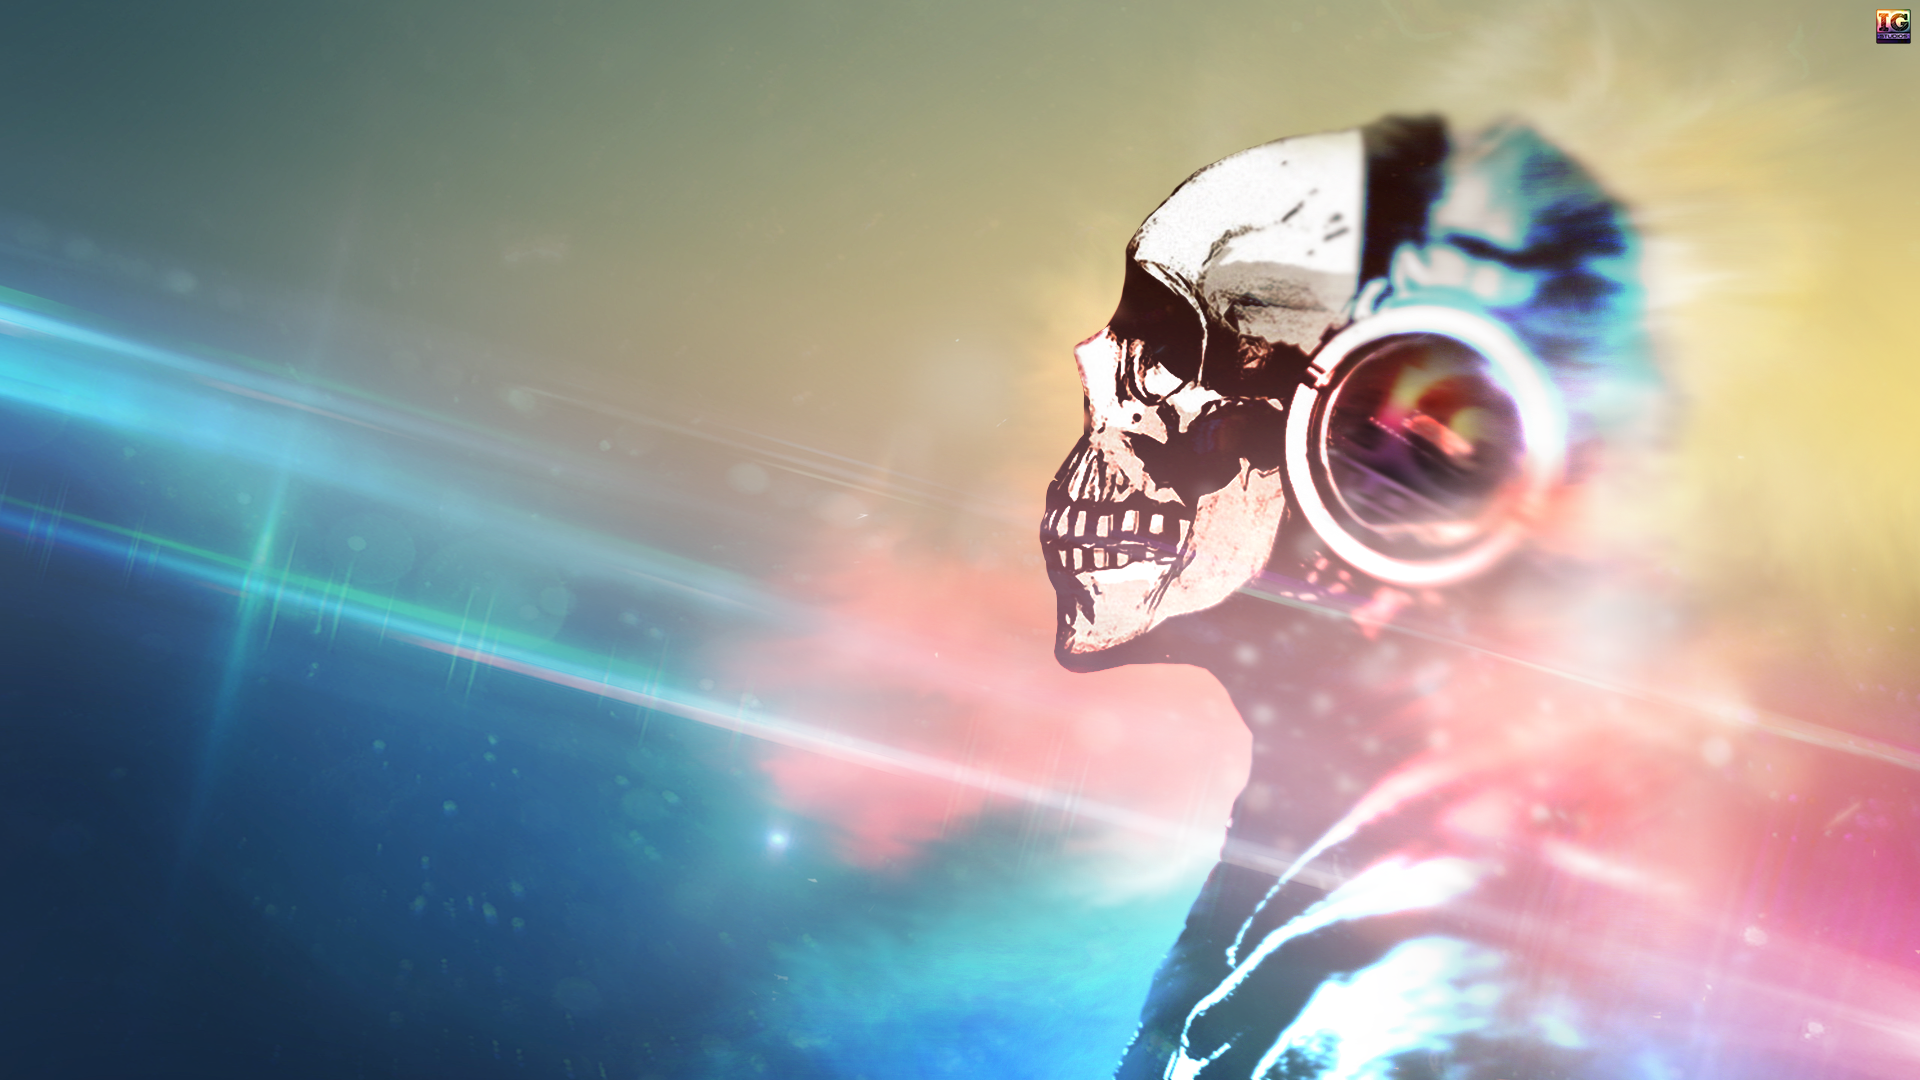 the skull music download